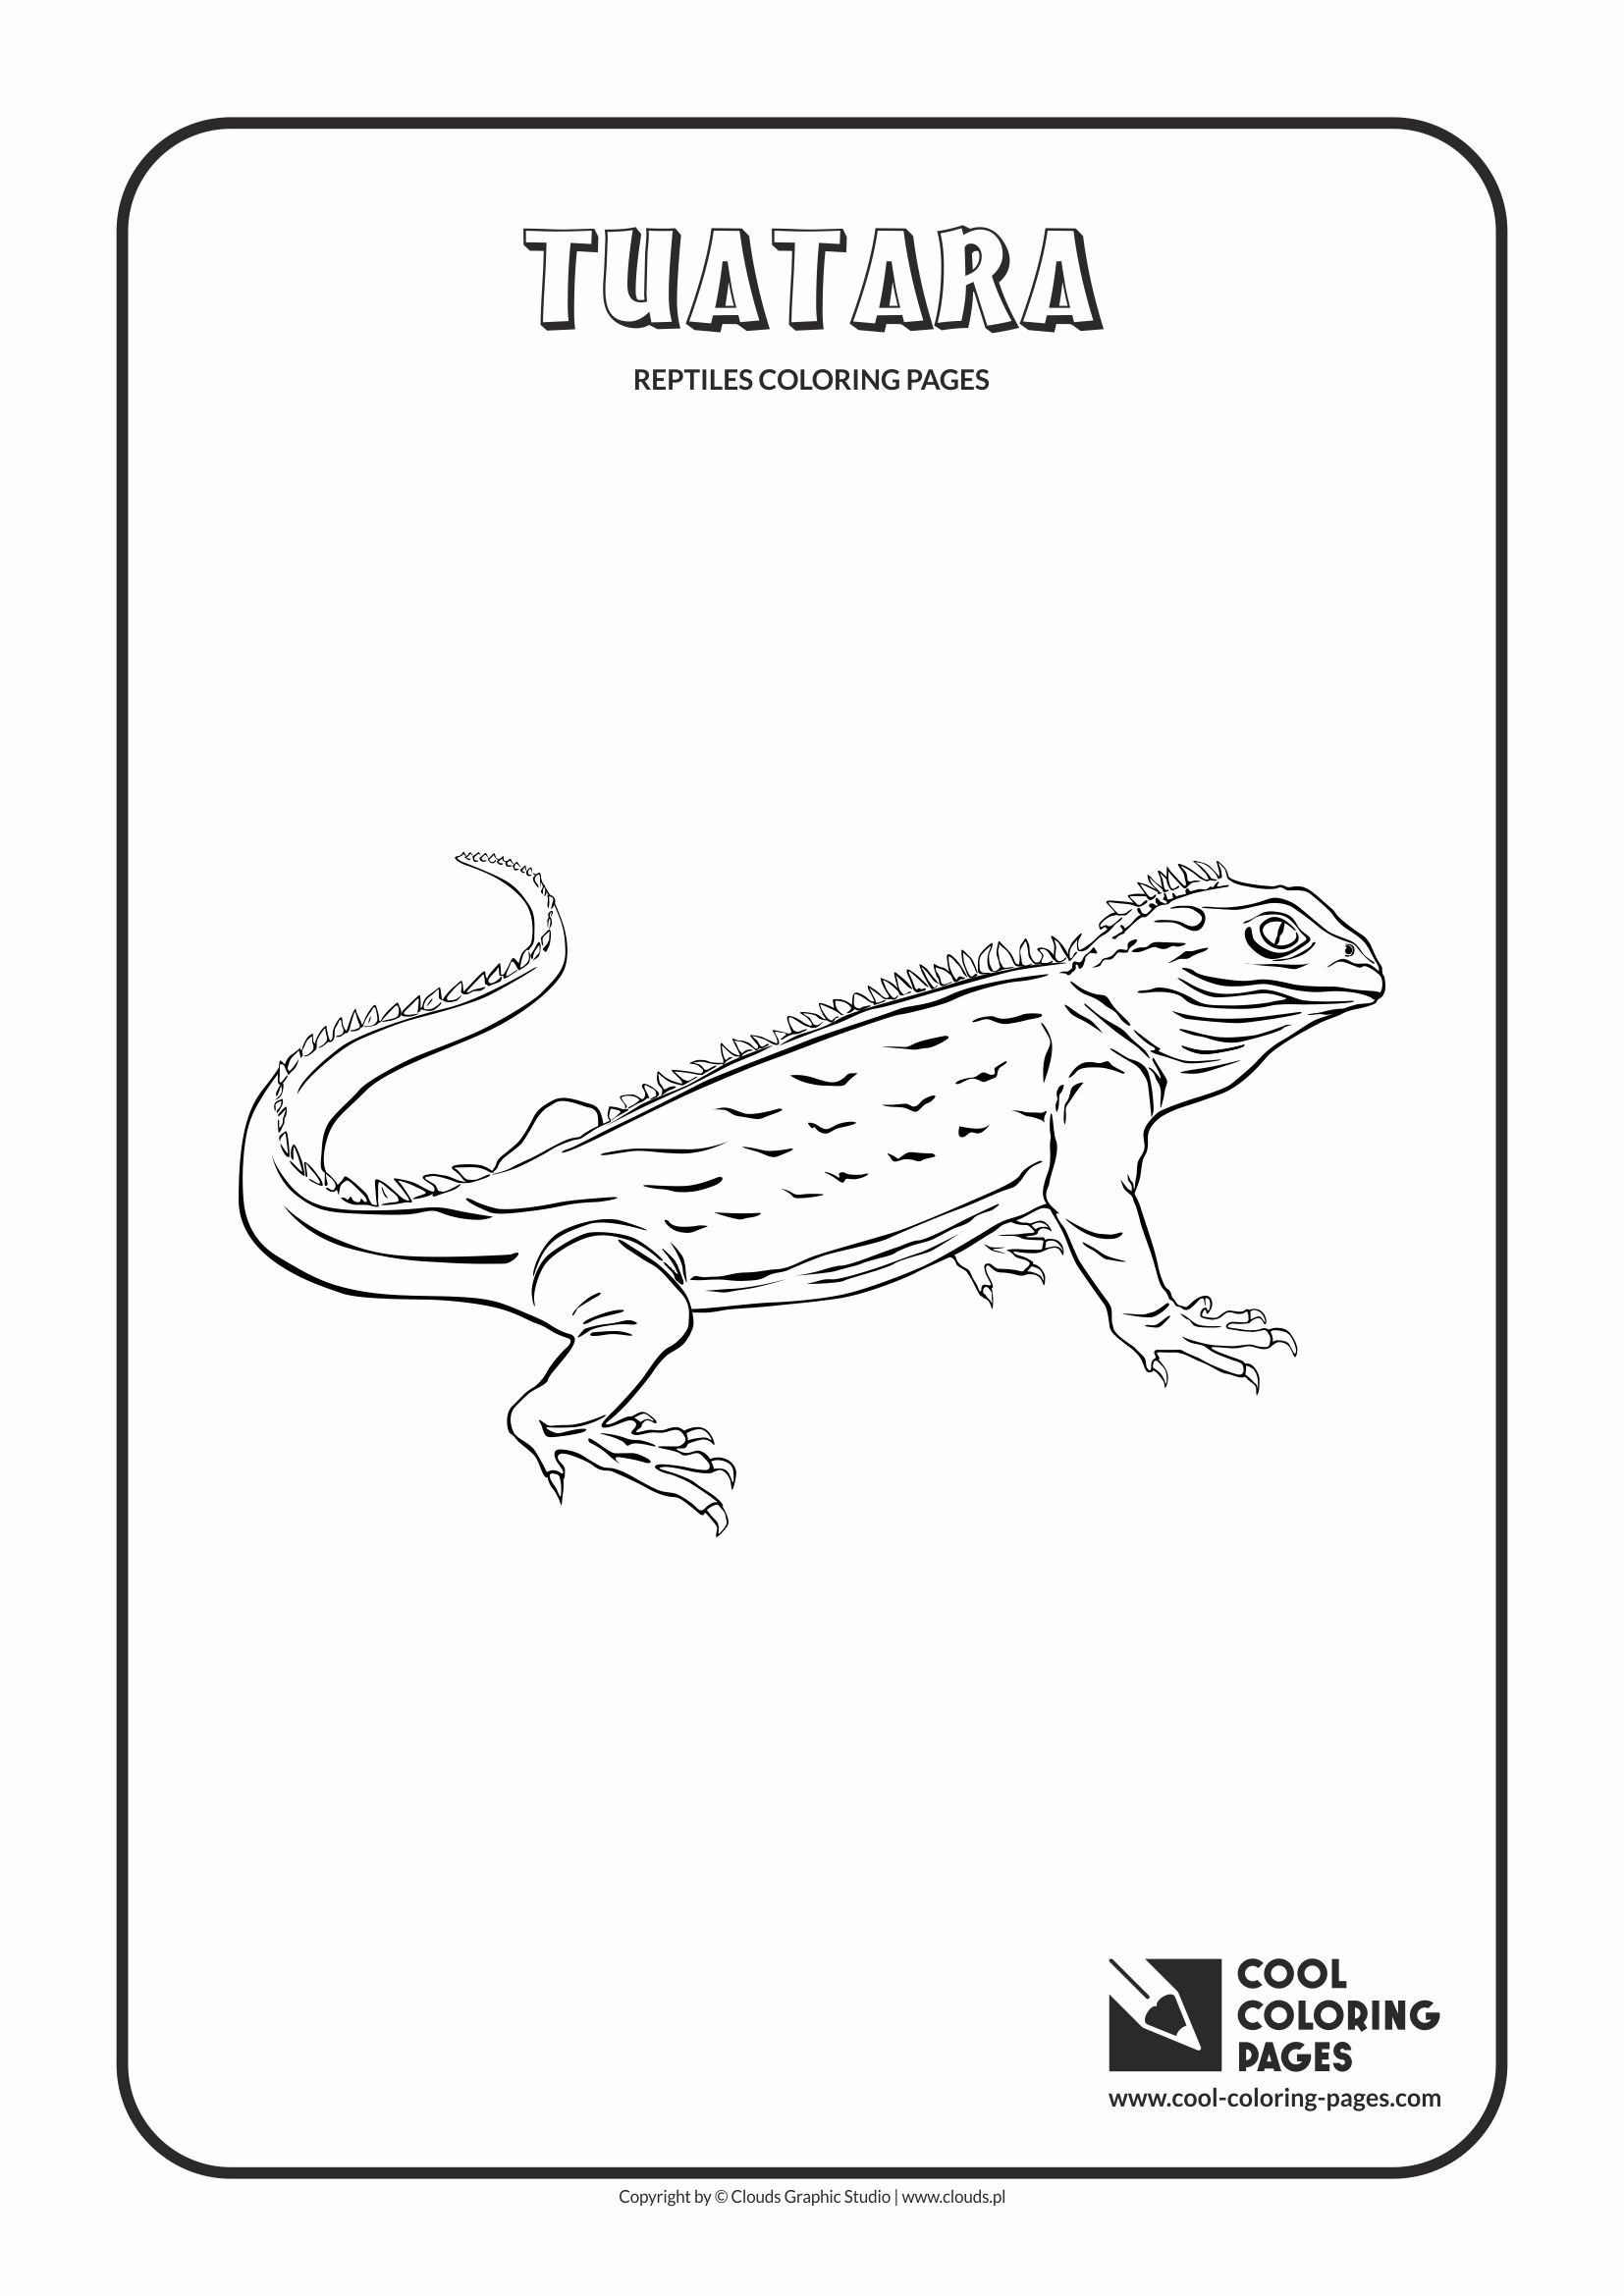 Cool Coloring Pages - Animals / Tuatara / Coloring page with tuatara